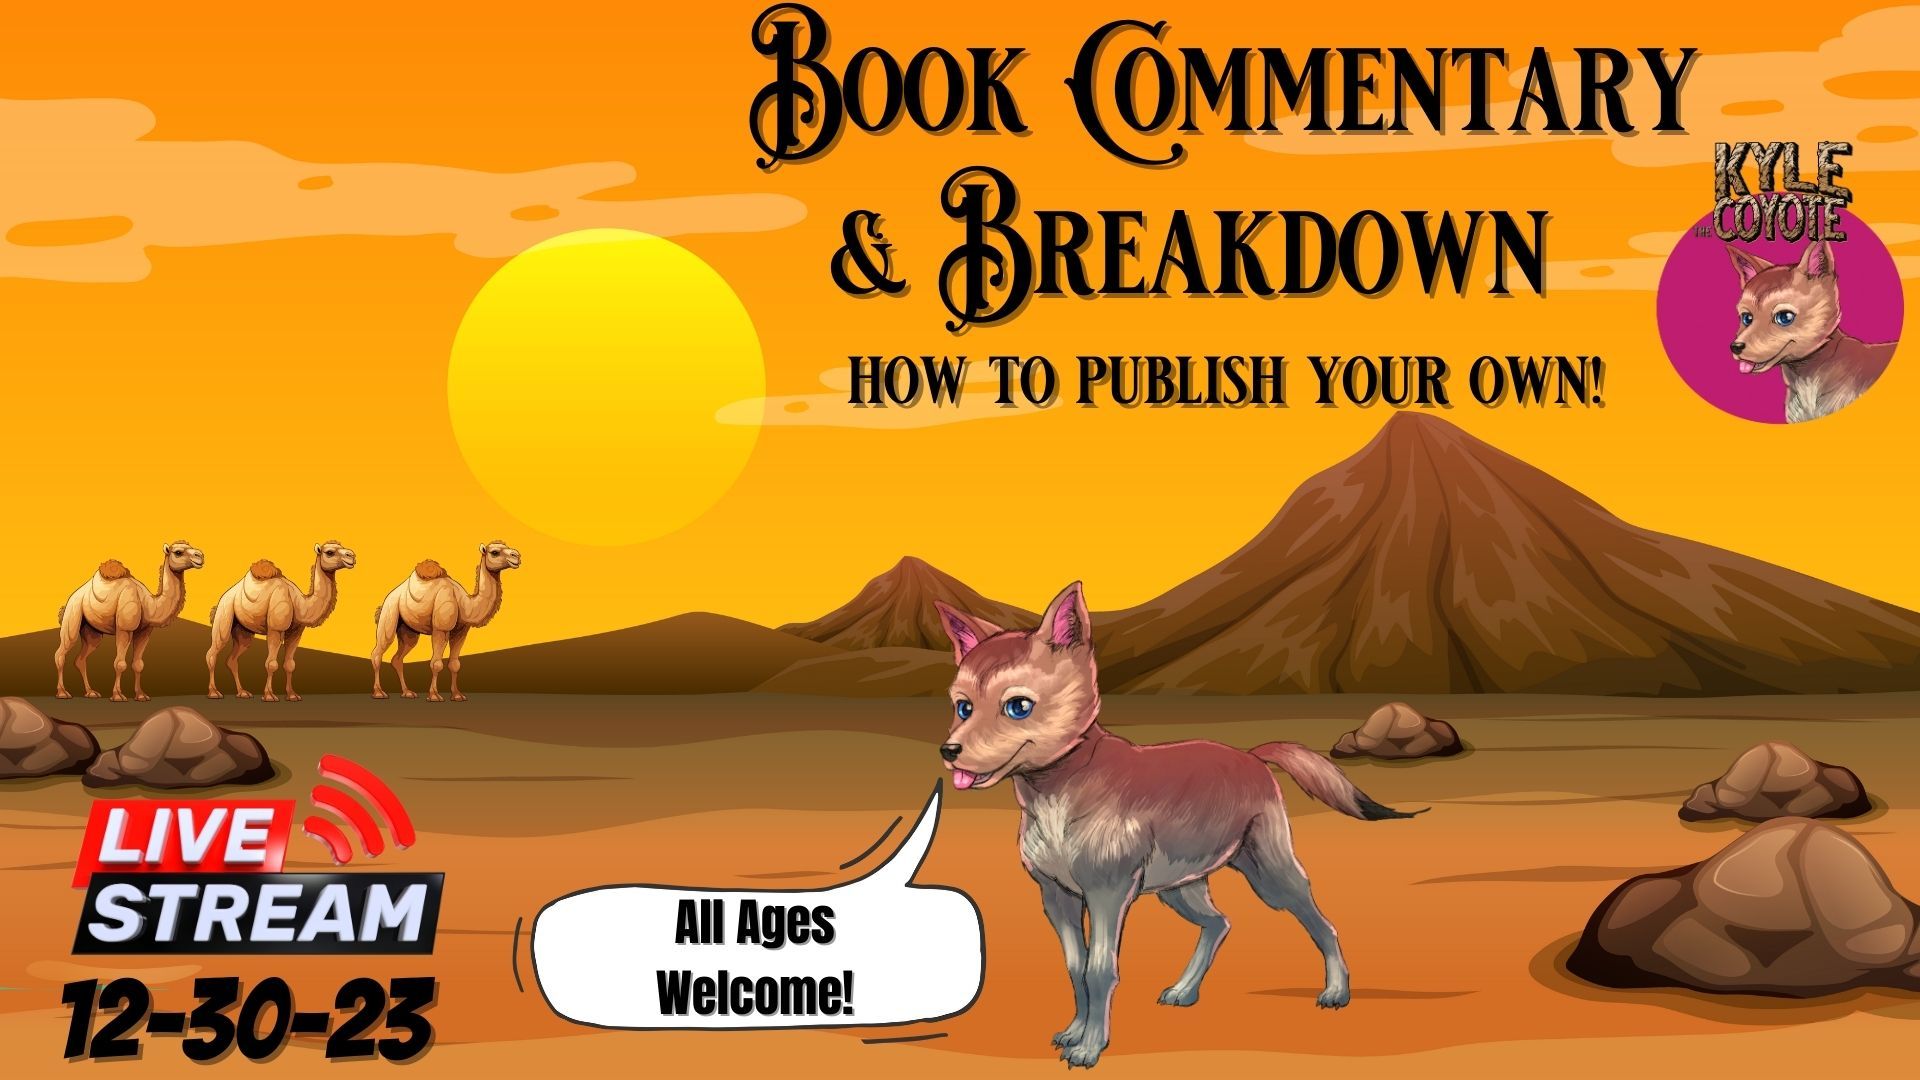 Kyle the Coyote: Book Commentary & Breakdown